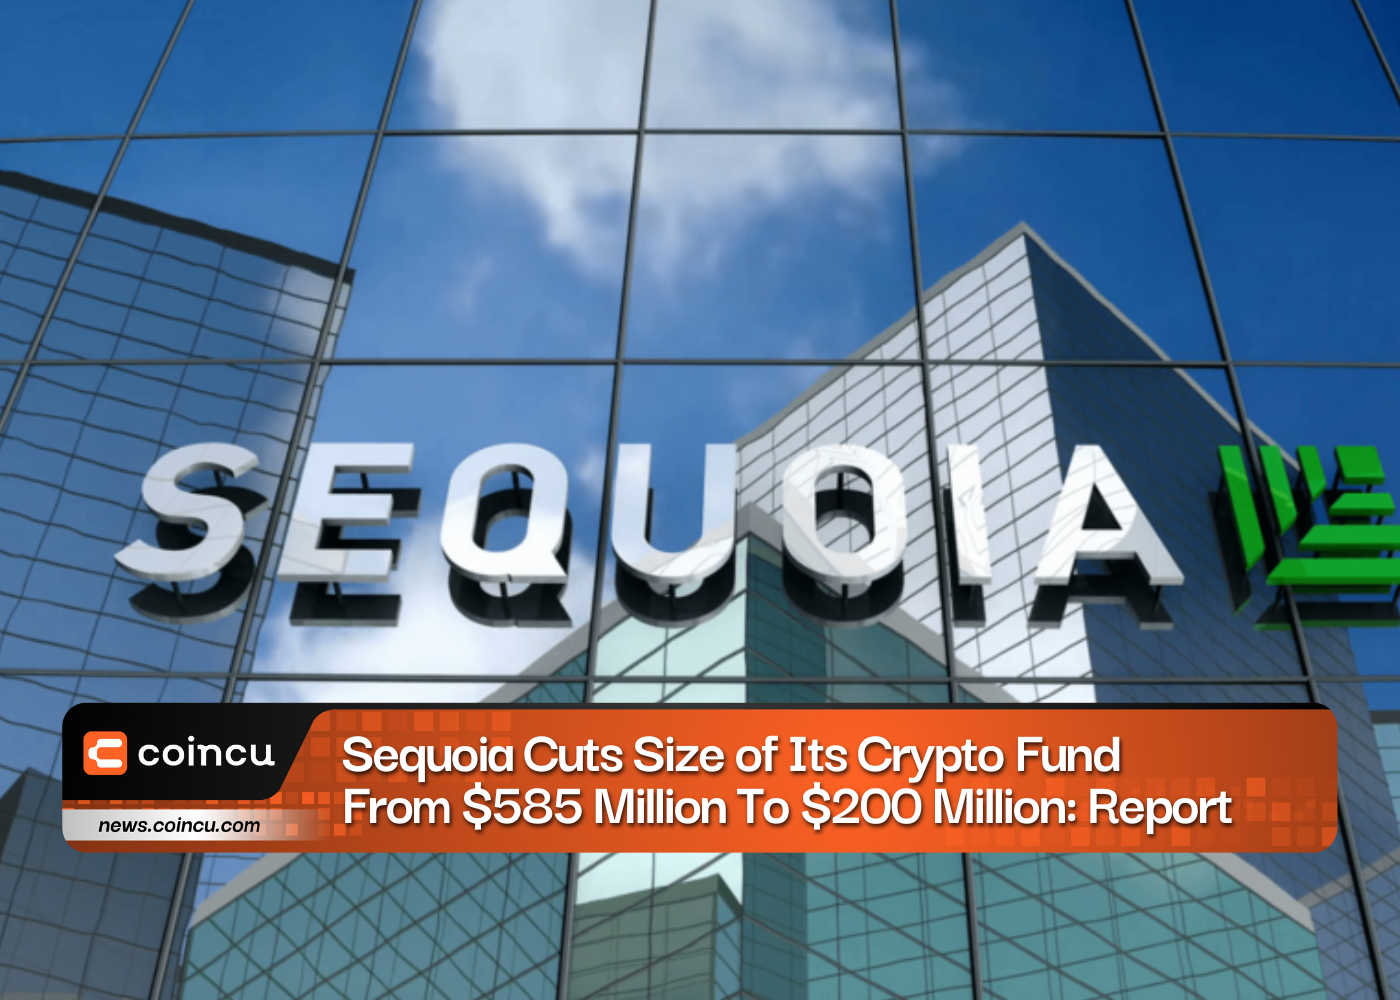 Sequoia Cuts Size Of Its Crypto Fund From $585 Million To $200 Million: Report